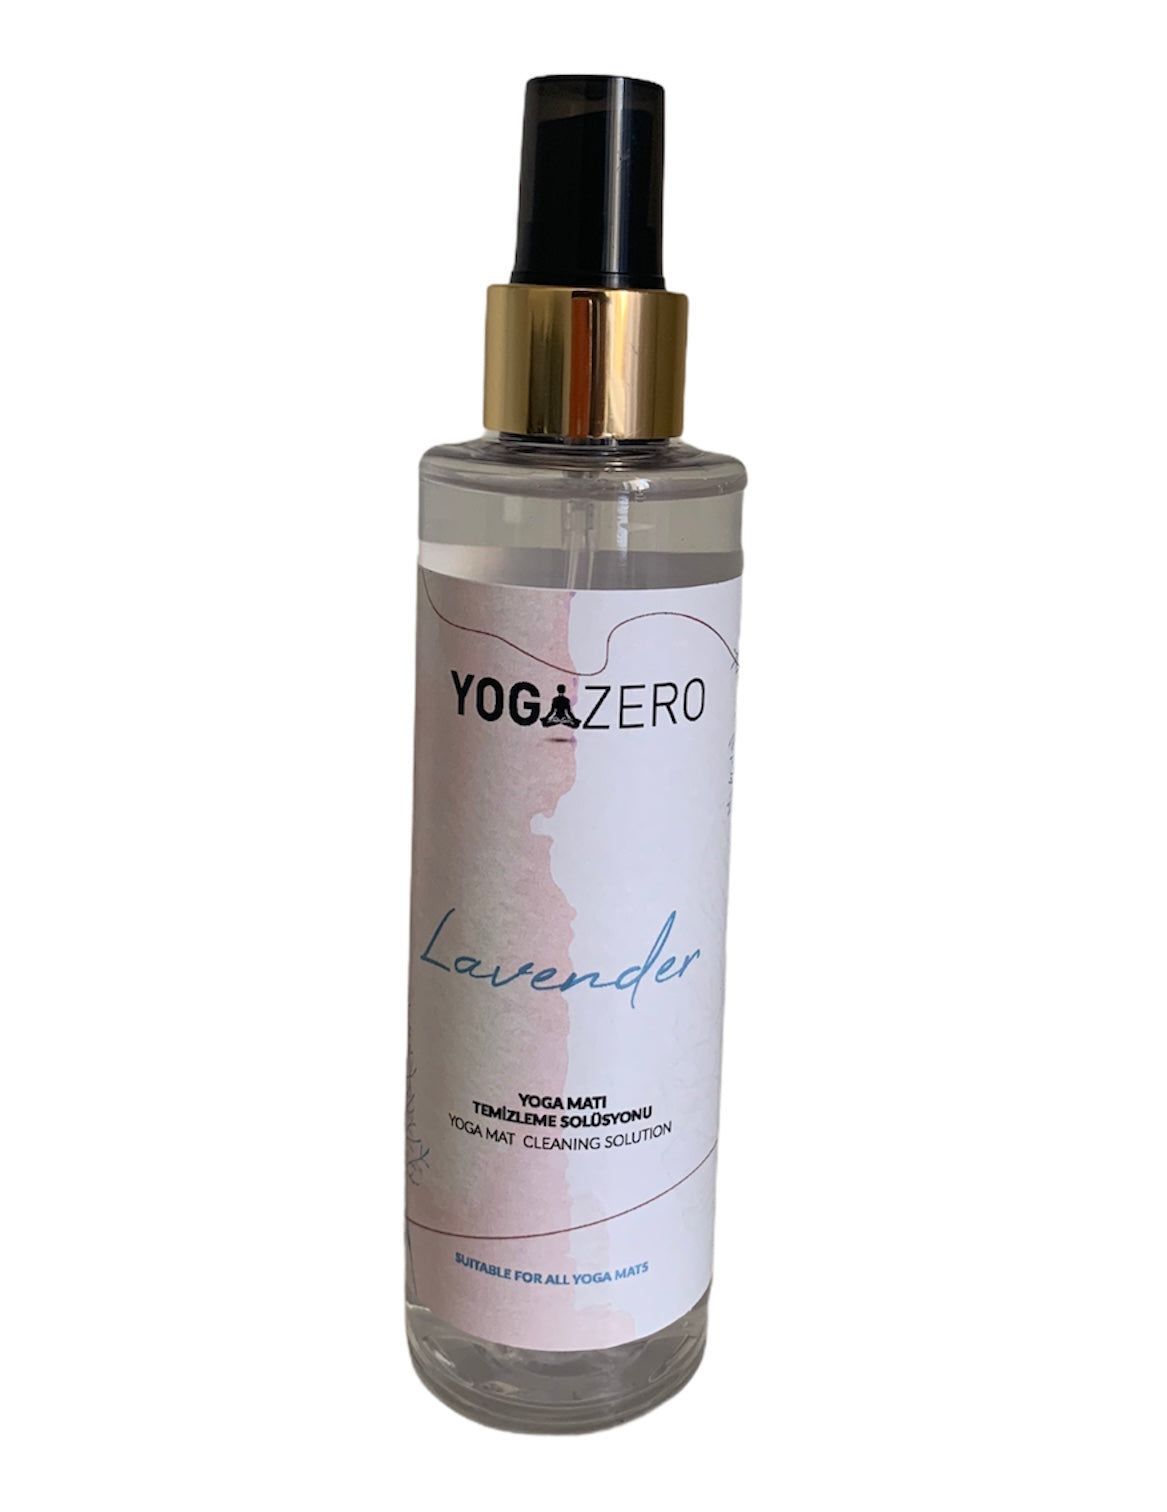 Yoga Mat cleaning solution